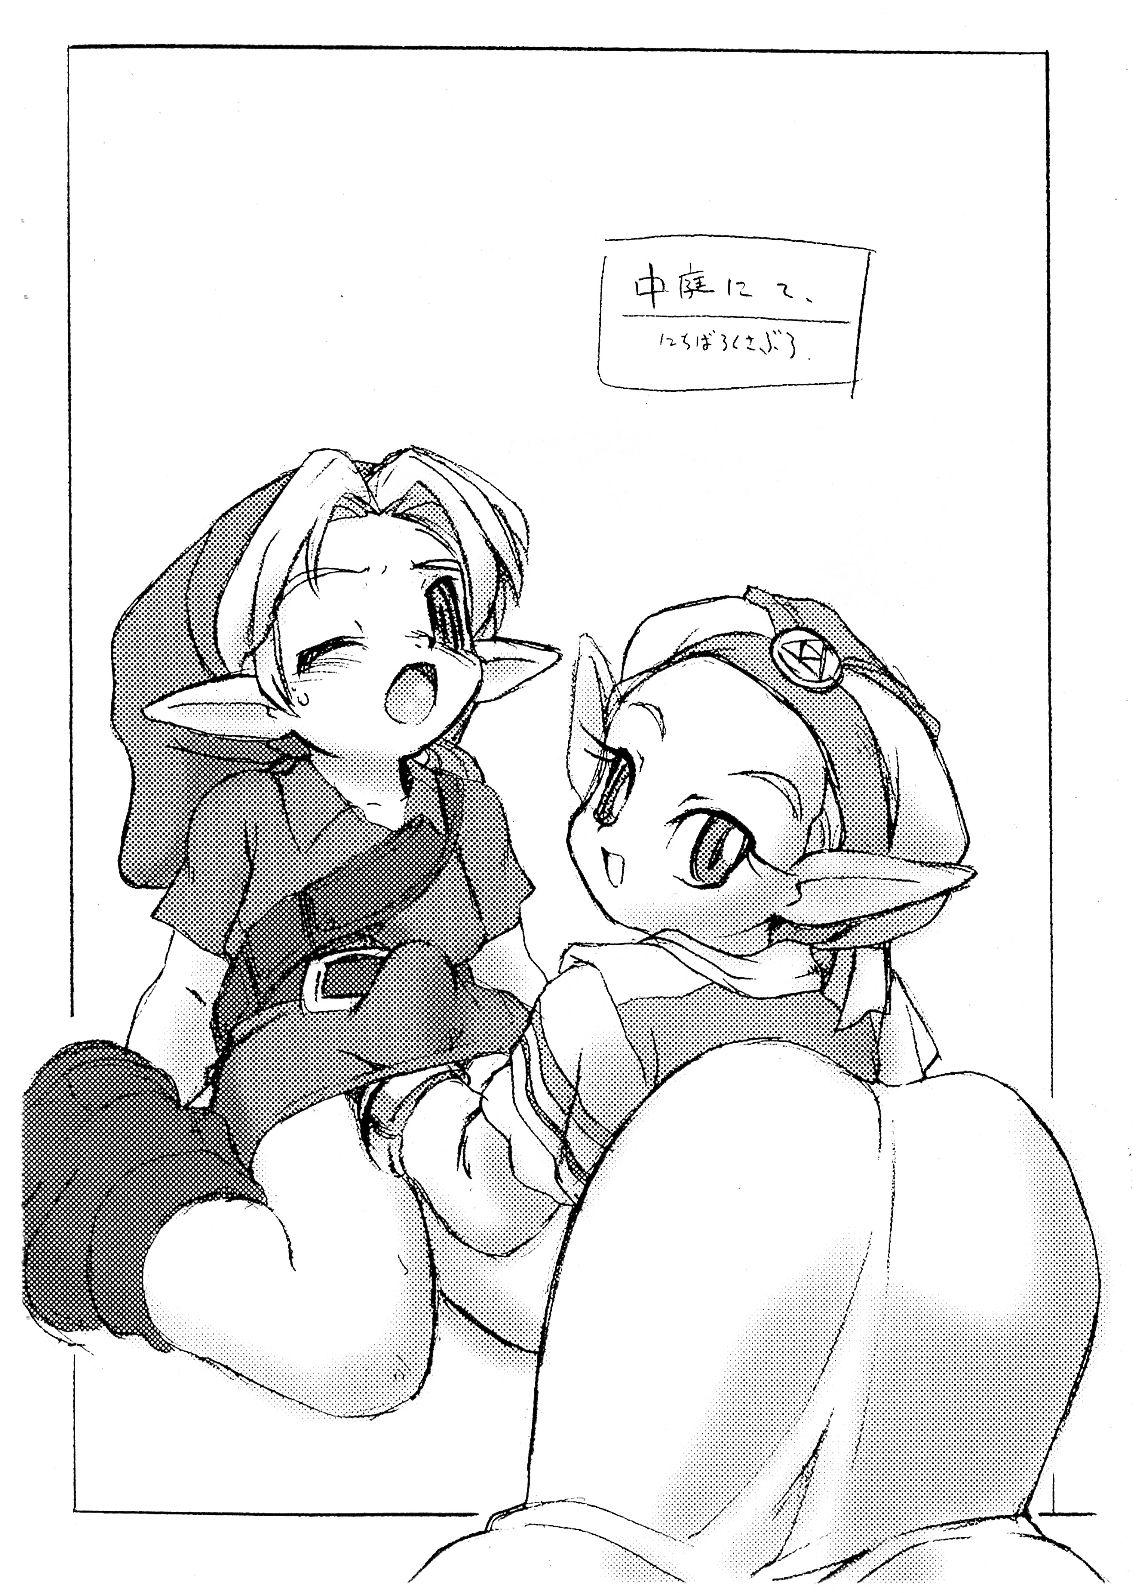 Bubble TOUCH DASH! + Omake - The legend of zelda Bakusou kyoudai lets and go Indian Sex - Page 7